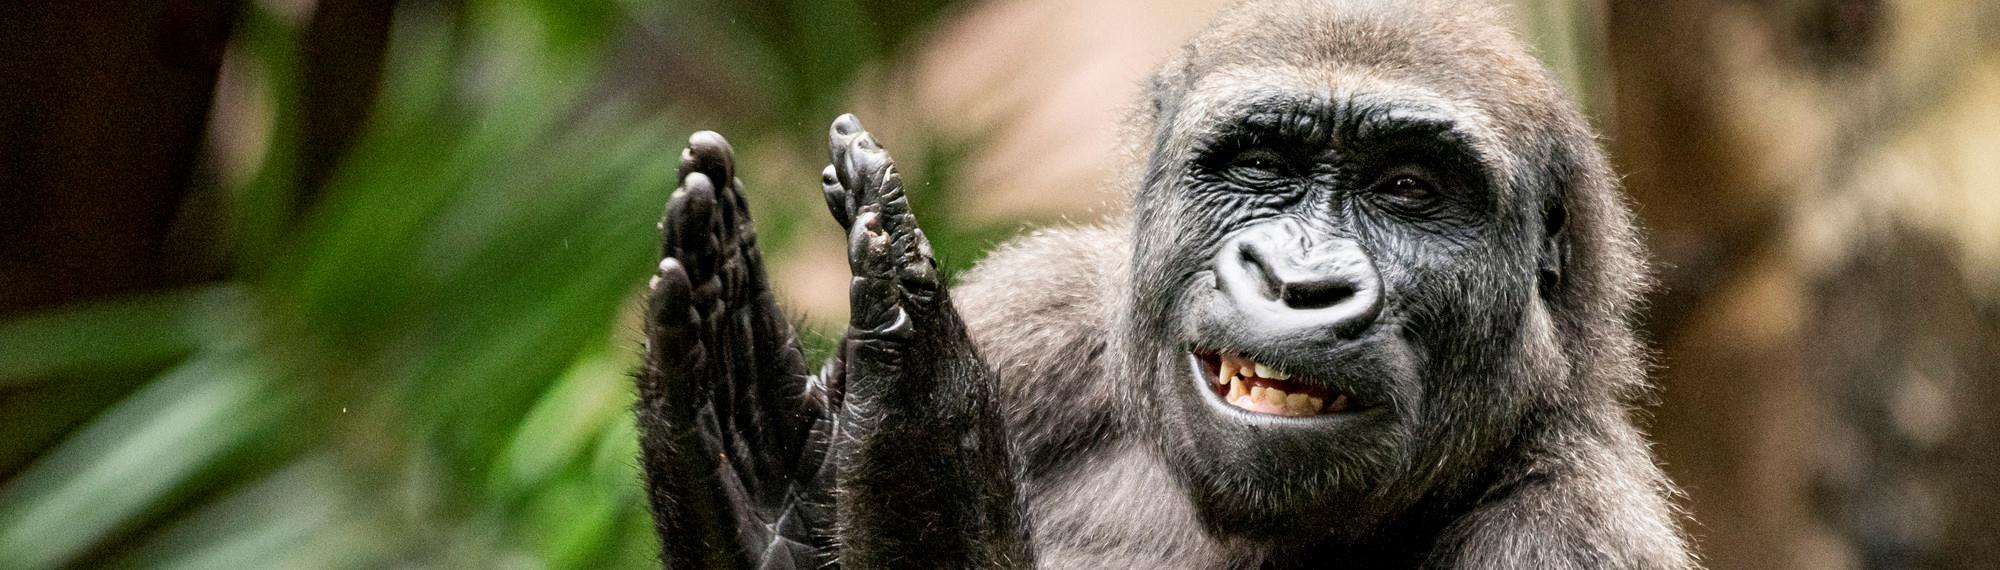 A Western Lowland Gorilla, smiling, clapping and looking left.